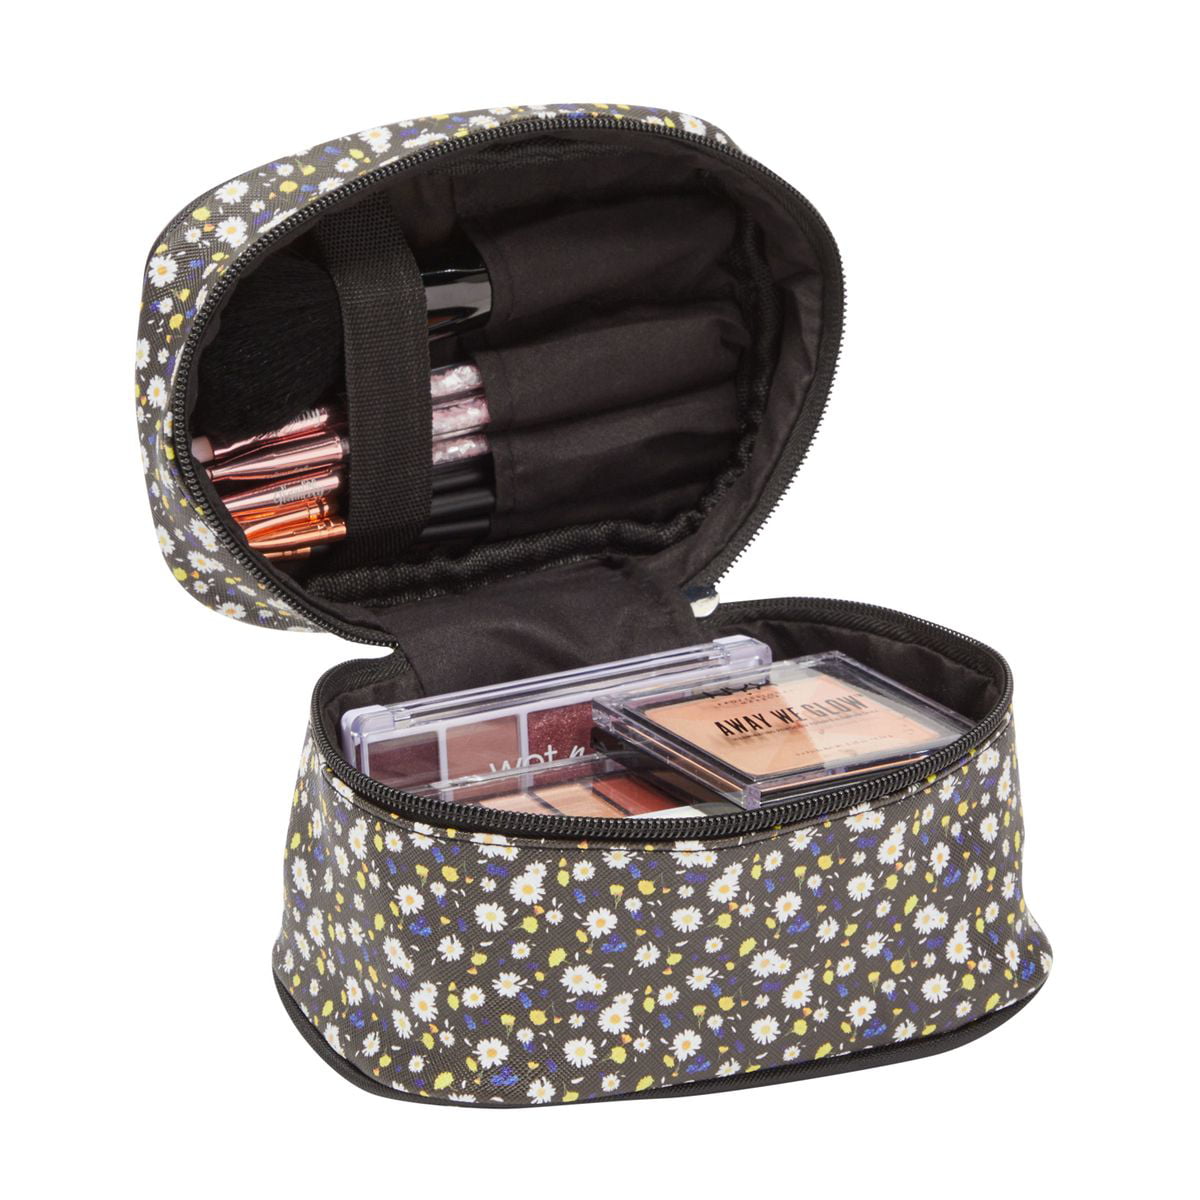 Under One Sky 3 Piece Makeup Cosmetic Bag Set Train Case Set Pink/Clear NWT